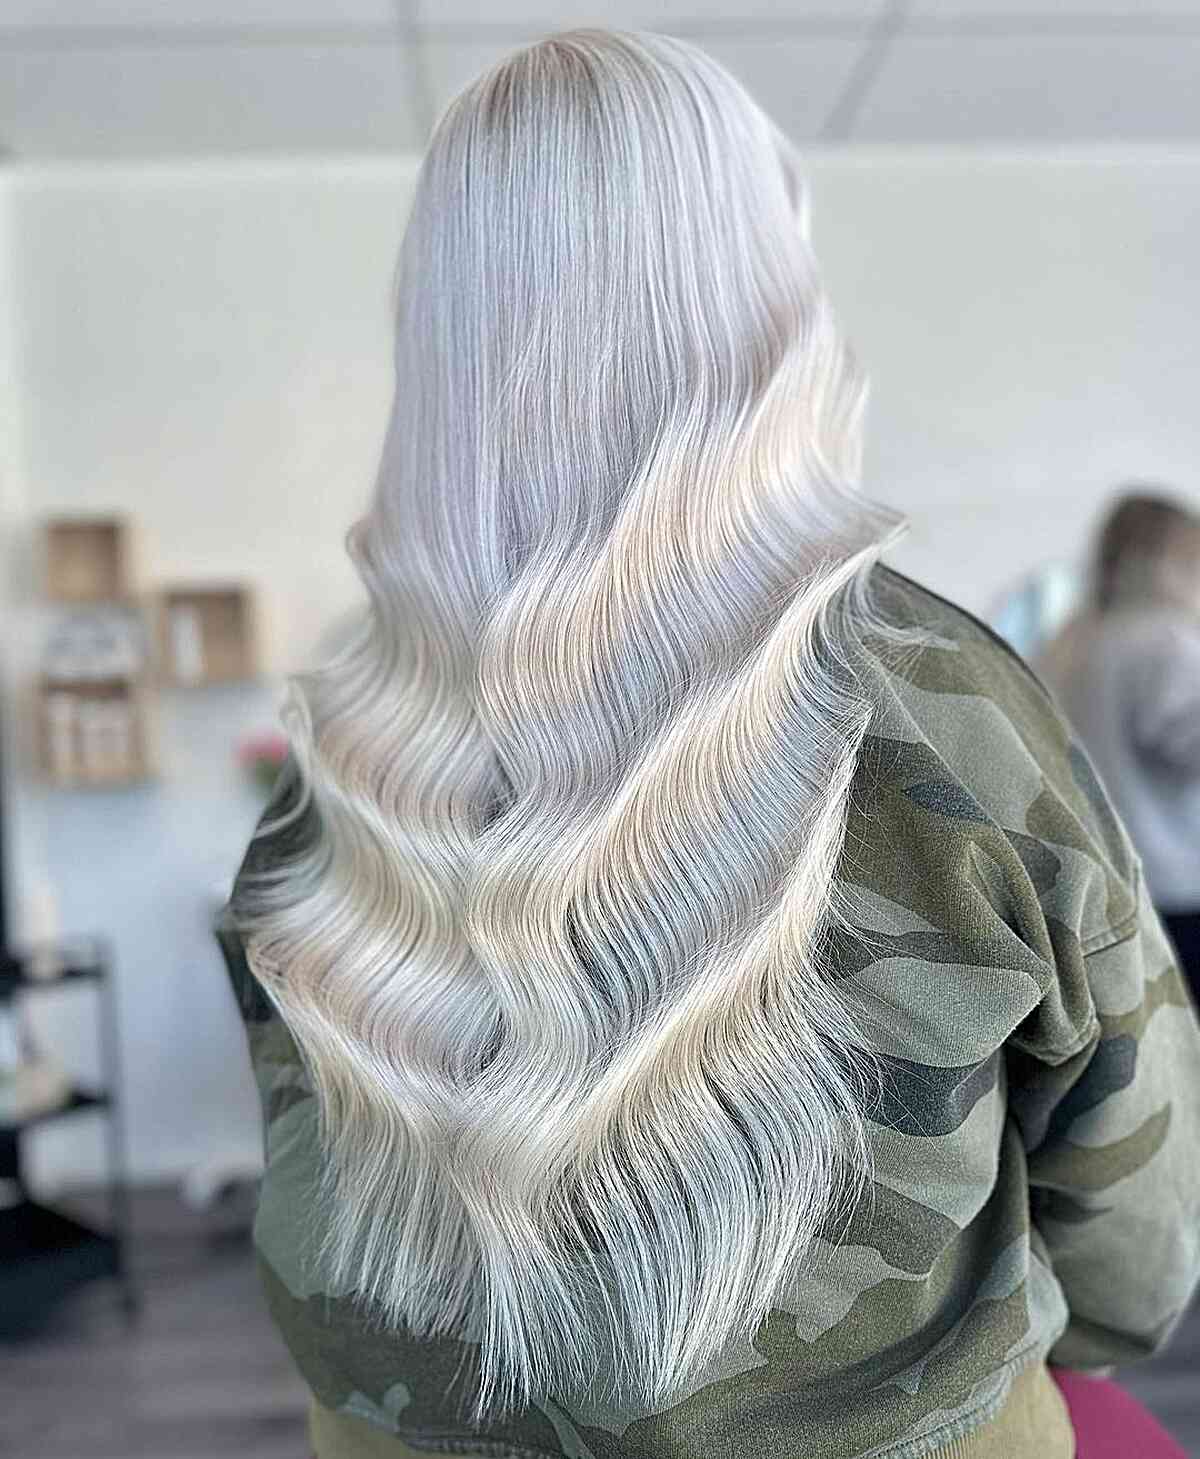 Long Waved White Blonde Hair for women with thin hair and blunt ends